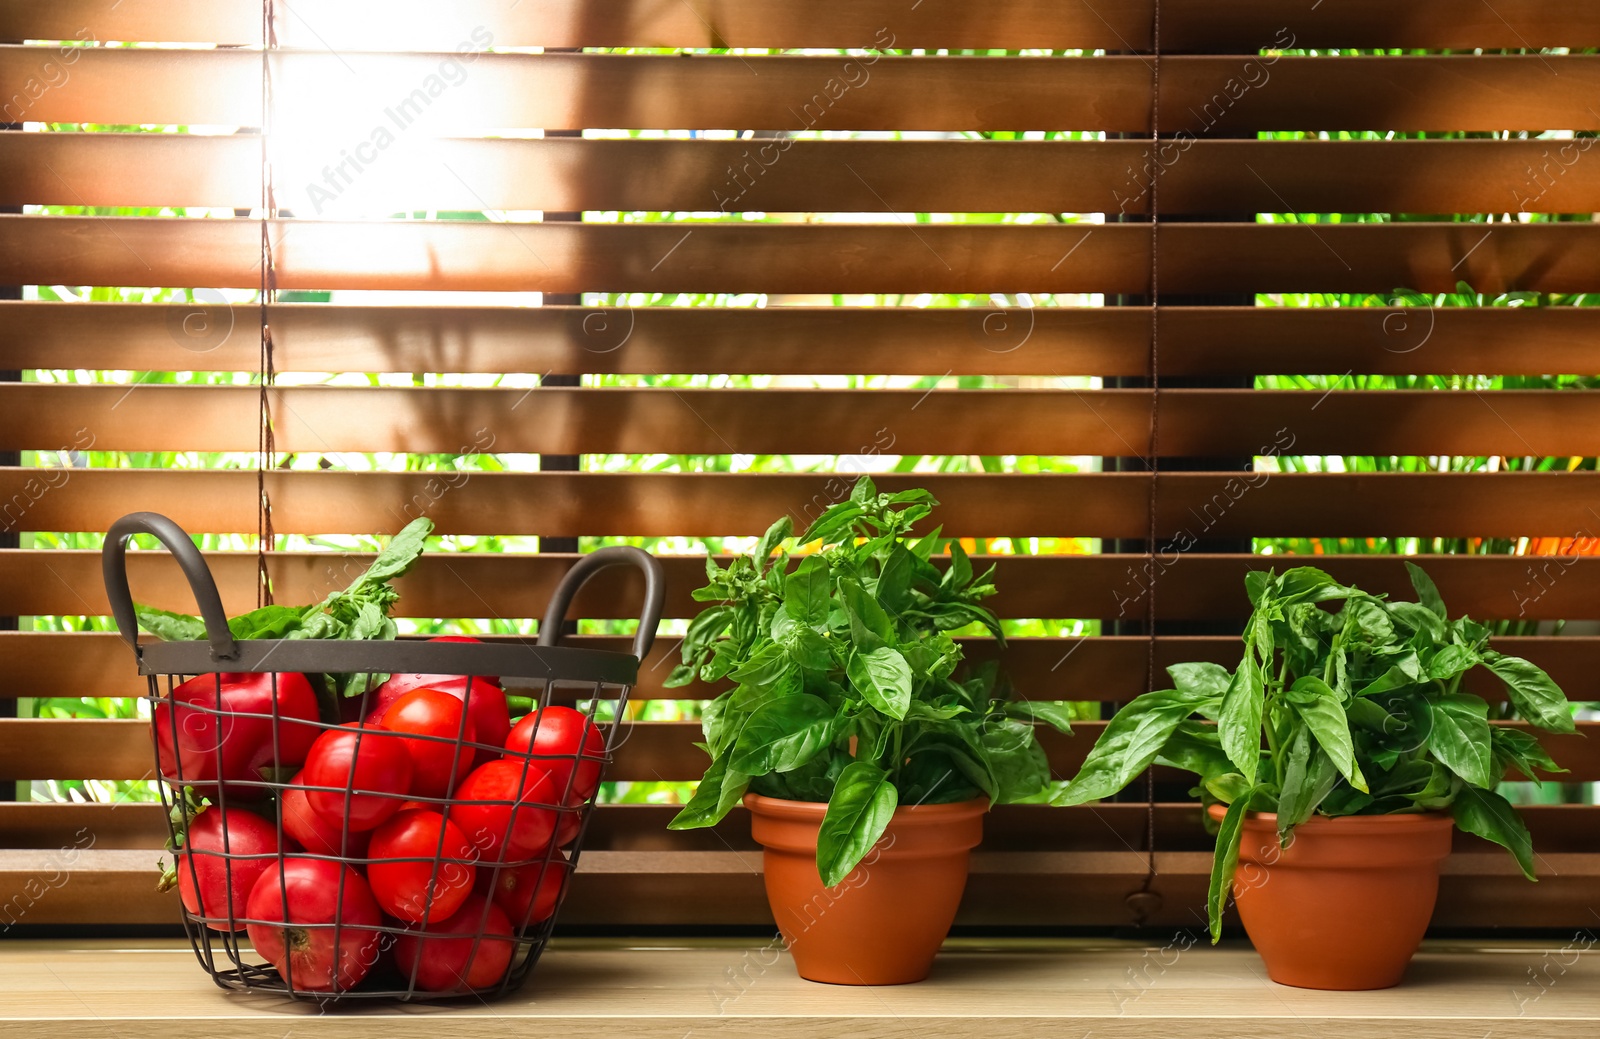 Photo of Green basil plants and tomatoes on window sill indoors